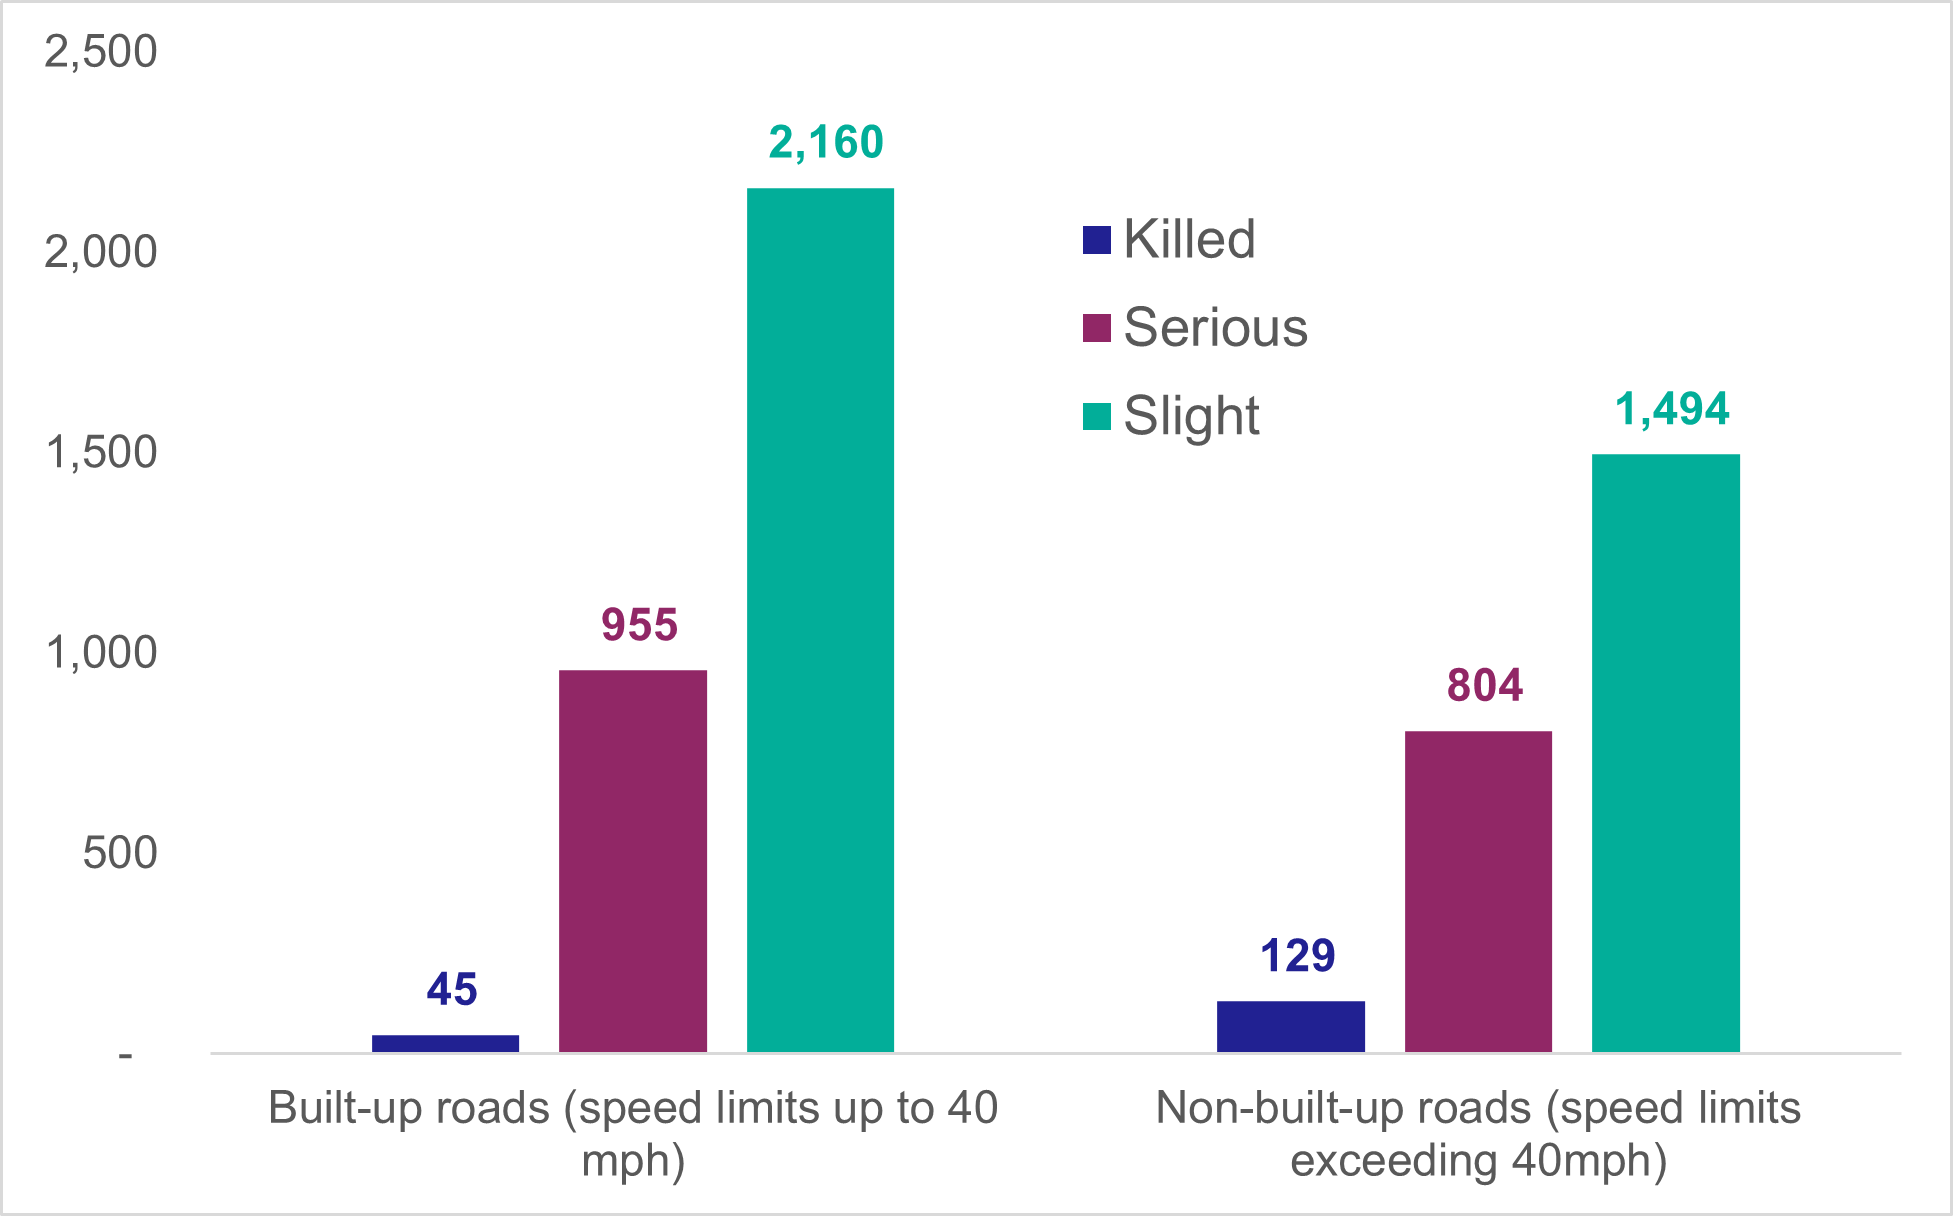 Figure 5: Number of casualties by road type, 2022 - as described in text above